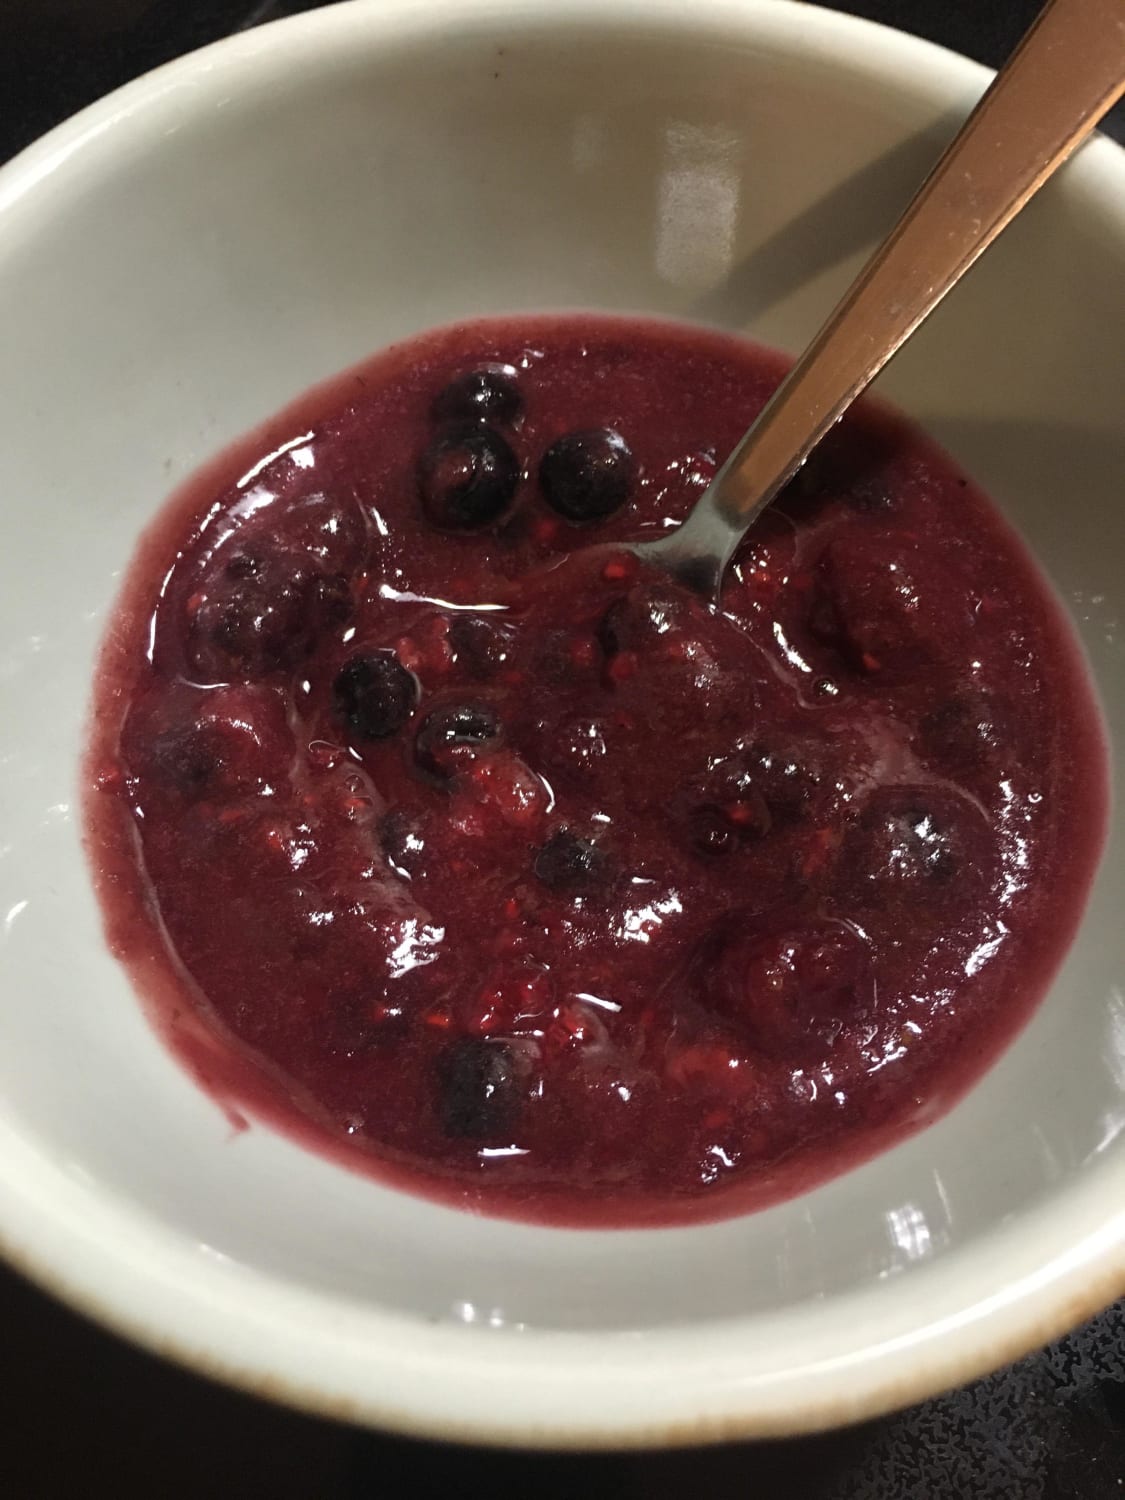 If you ever need a substitute for jam/jelly, mix date syrup with thawed frozen berries. Its healthier and tastes better imo